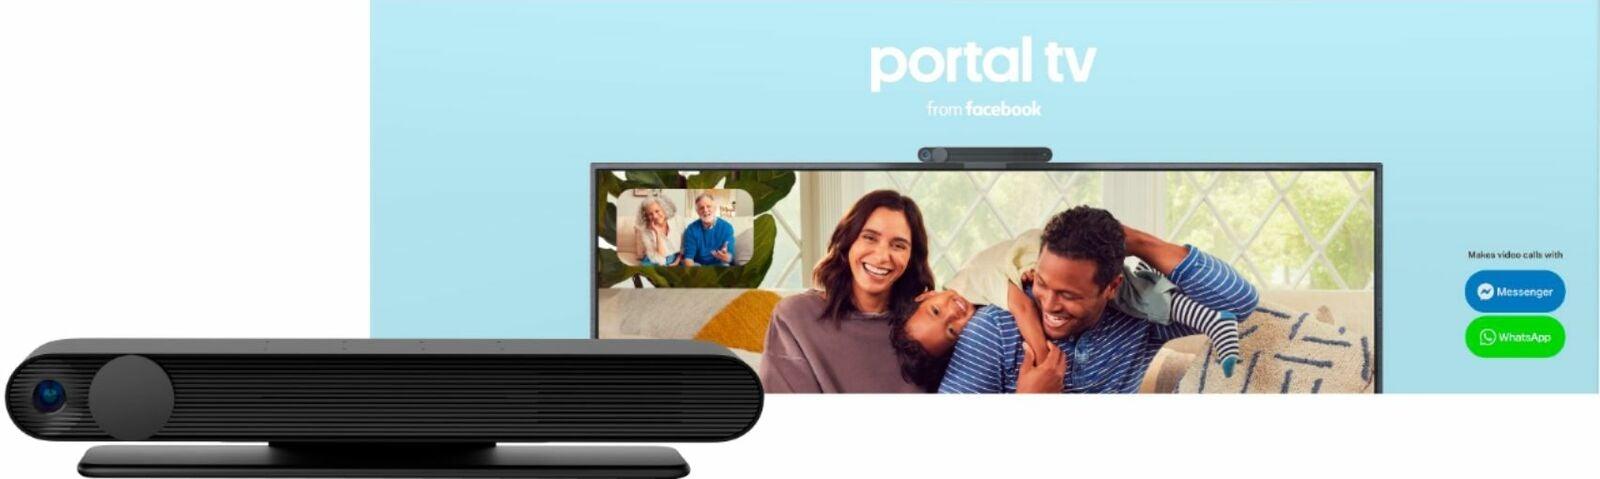 Portal TV Smart Video Calling on Your TV with Alexa - Black - Etyn Online {{ product_tag }}